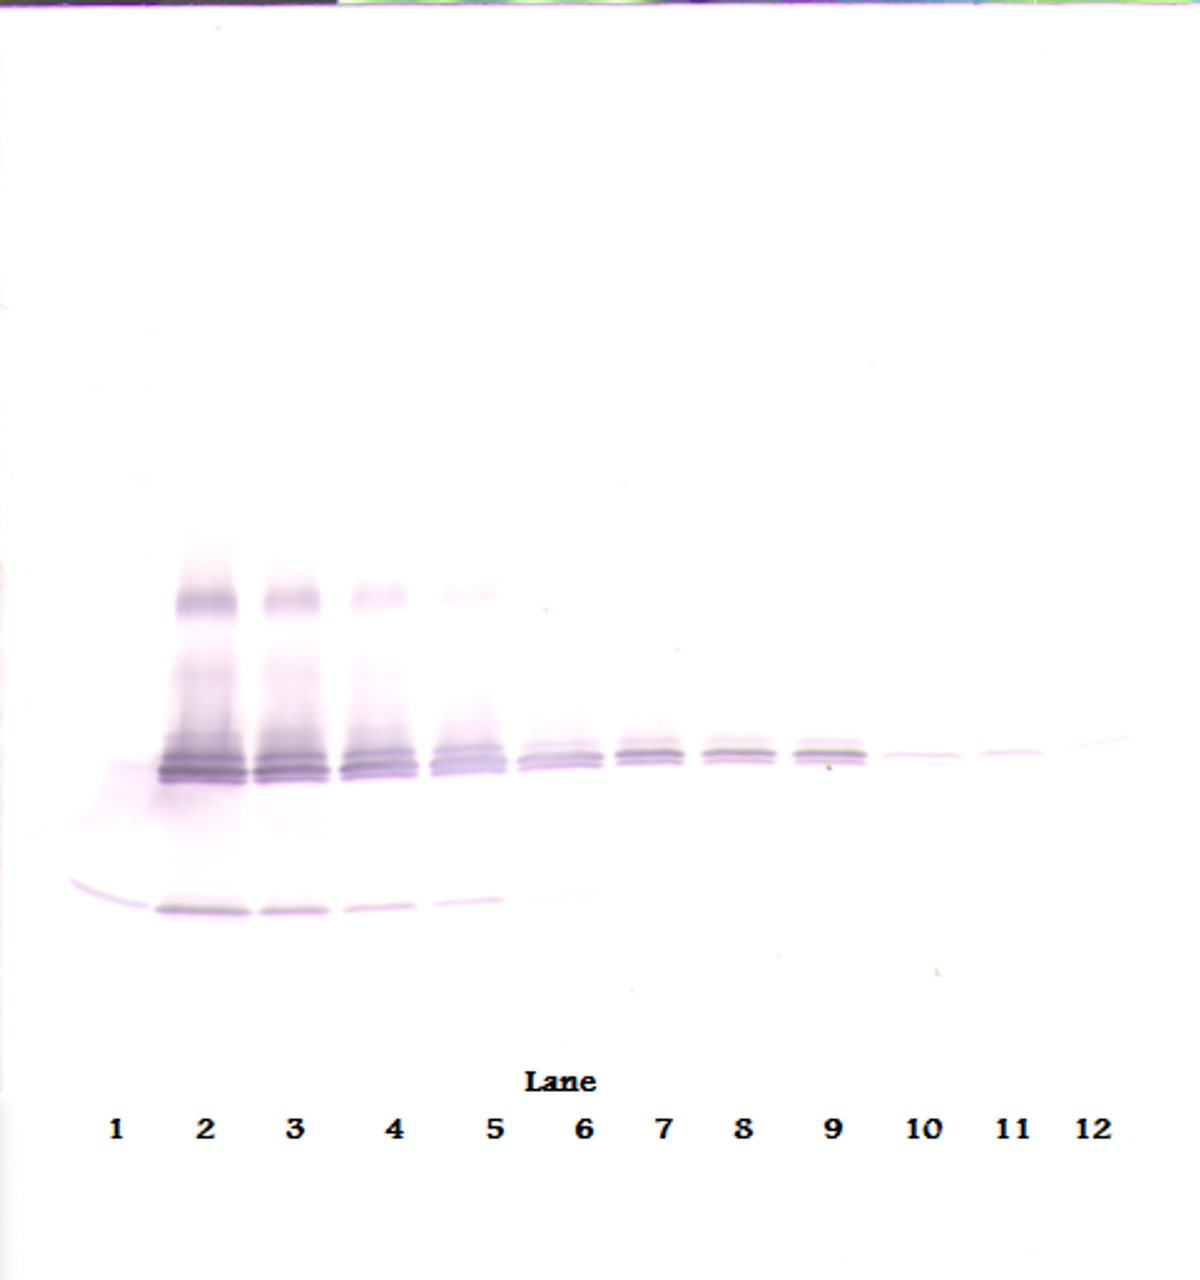 To detect mIL-17A by Western Blot analysis this antibody can be used at a concentration of 0.1 - 0.2 ug/ml. Used in conjunction with compatible secondary reagents the detection limit for recombinant mIL-17A is 1.5 - 3.0 ng/lane, under either reducing or non-reducing conditions.